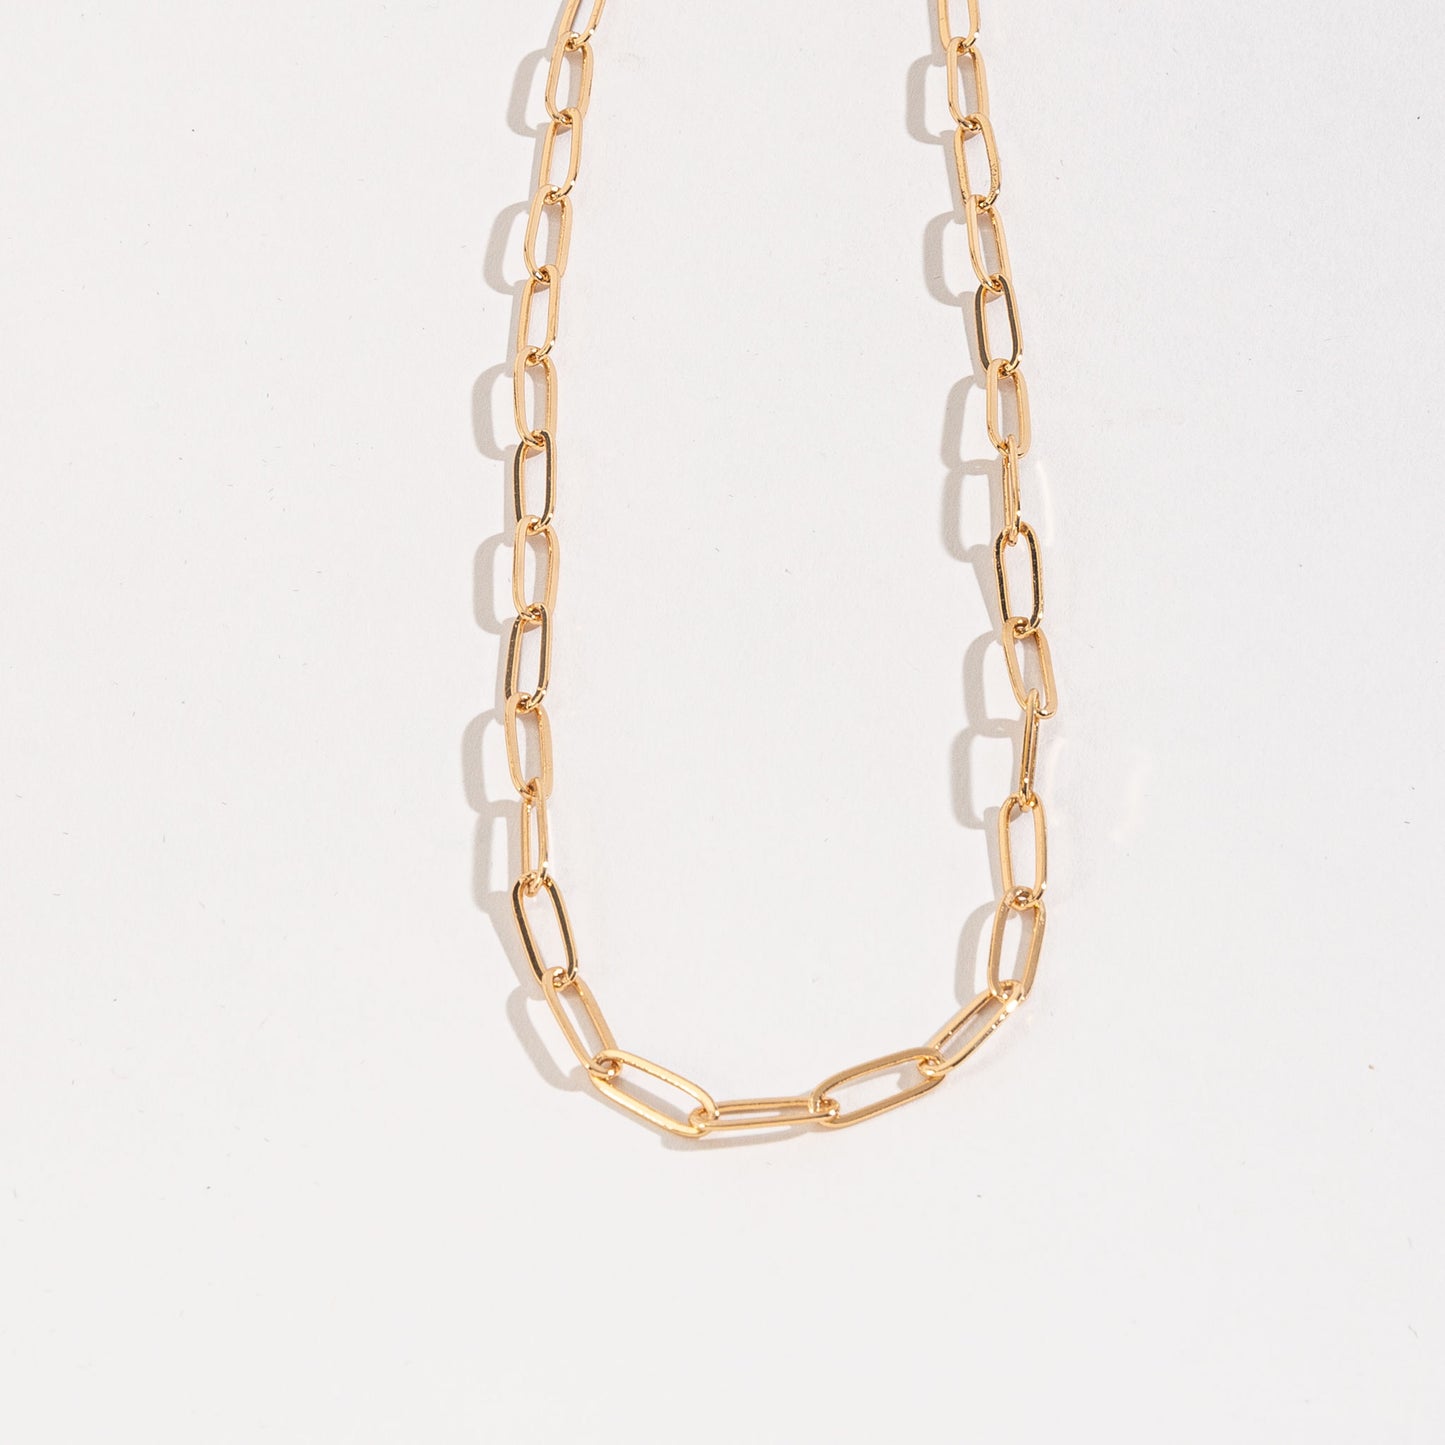 16" 5mm Paperclip Necklace Chain